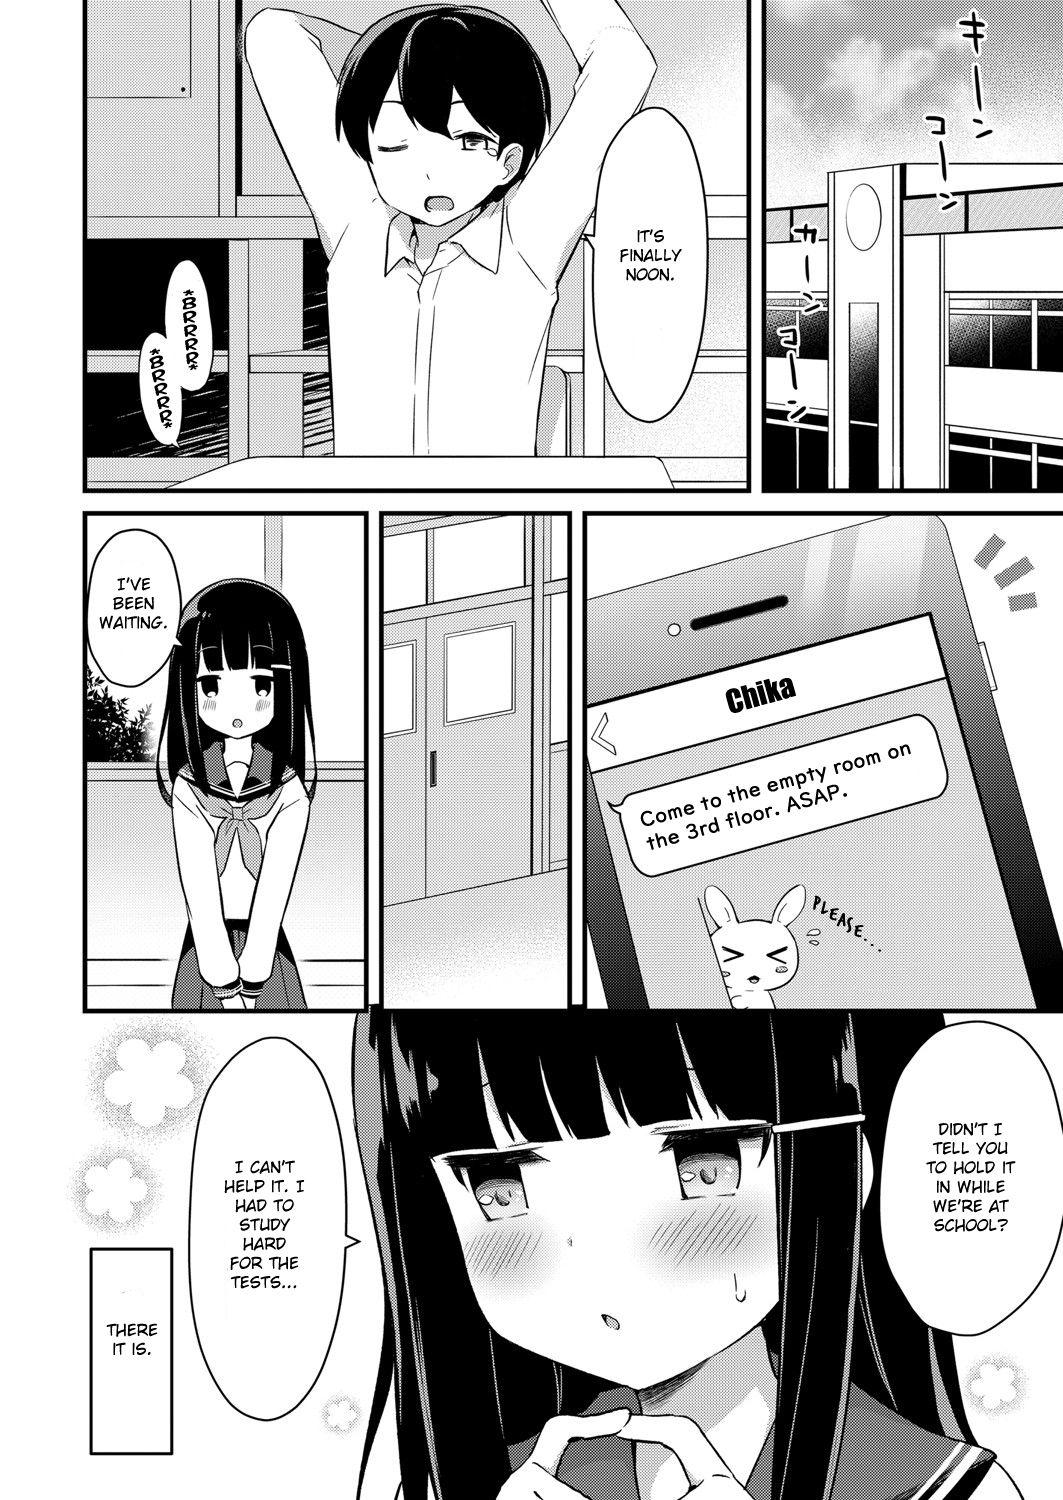 Lesbos [Tiger] Yuuwaku・Imouto #2 Onii-chan wa seishori gakari | Little Sister Temptation #2 Onii-chan is in Charge of My Libido Management (COMIC Reboot Vol. 07) [English] [Digital] Fat Pussy - Page 4